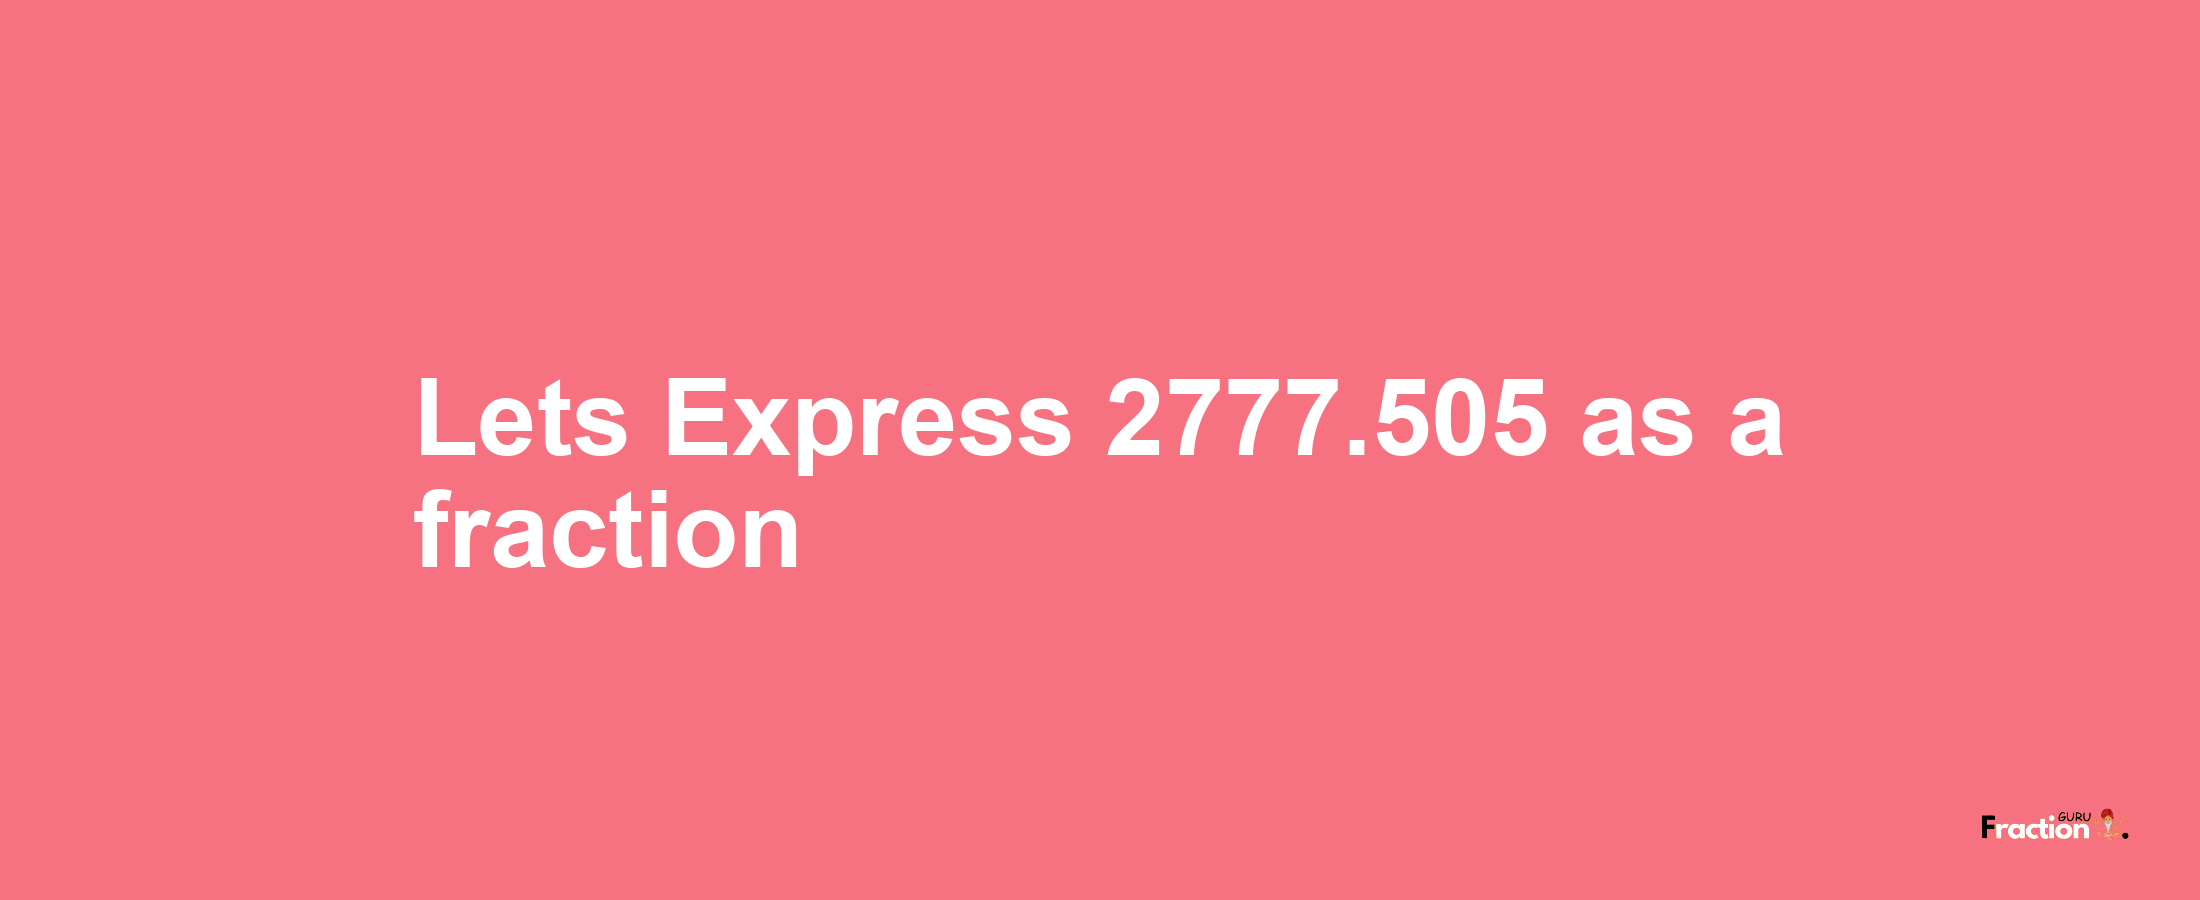 Lets Express 2777.505 as afraction